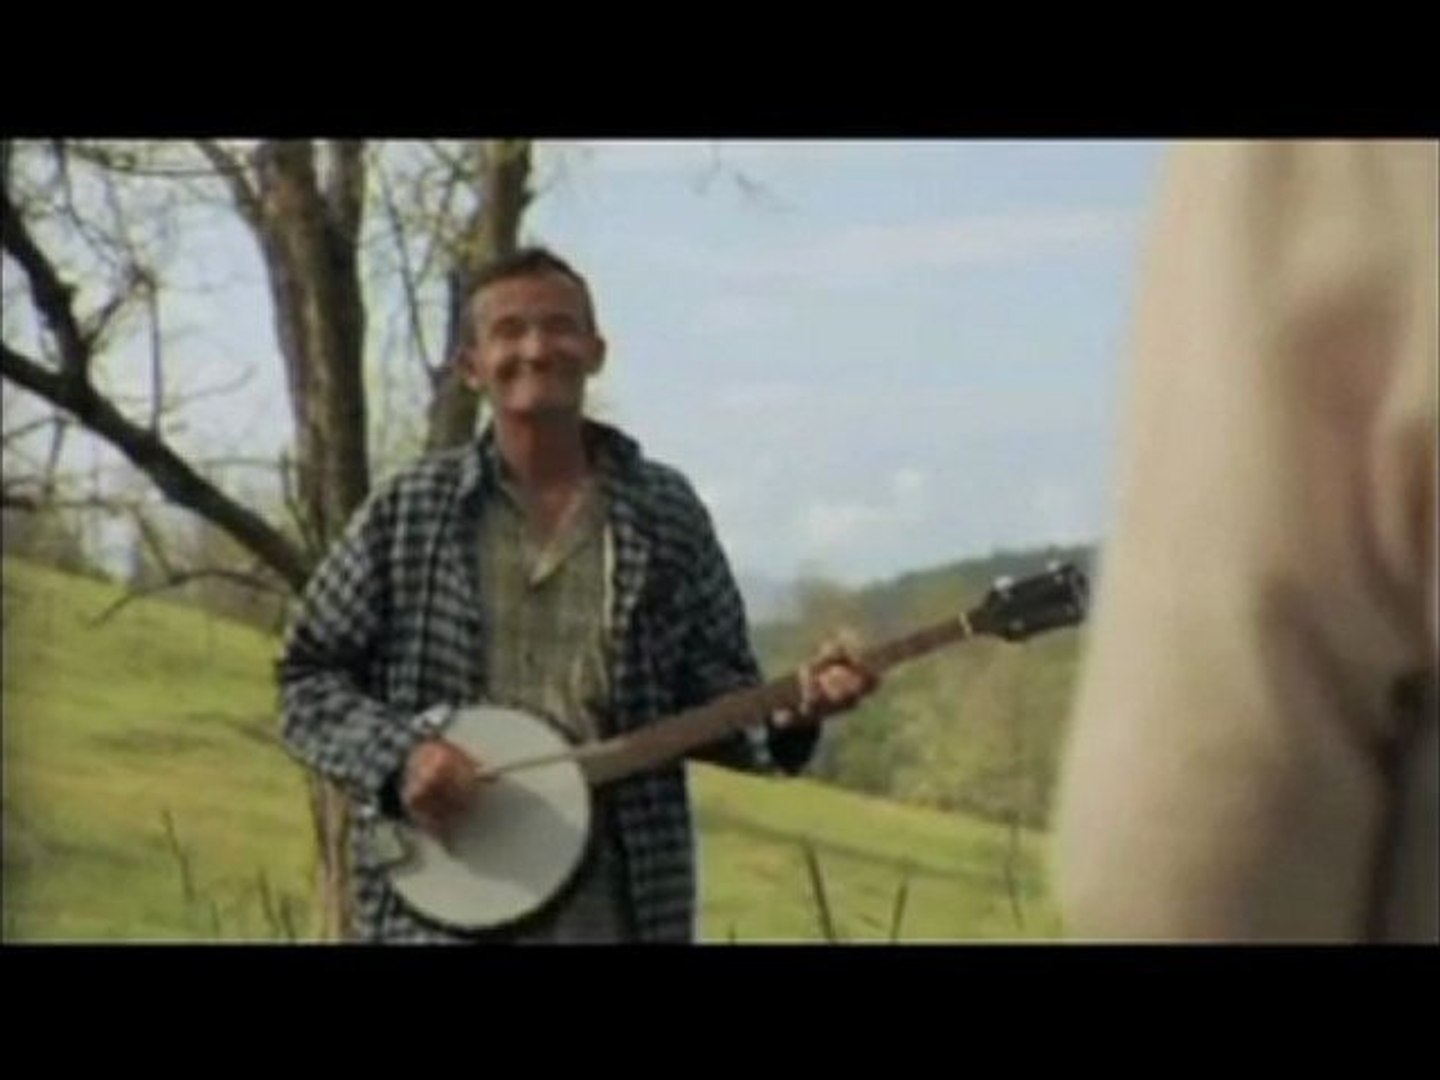 deliverance outrage movie - video Dailymotion.